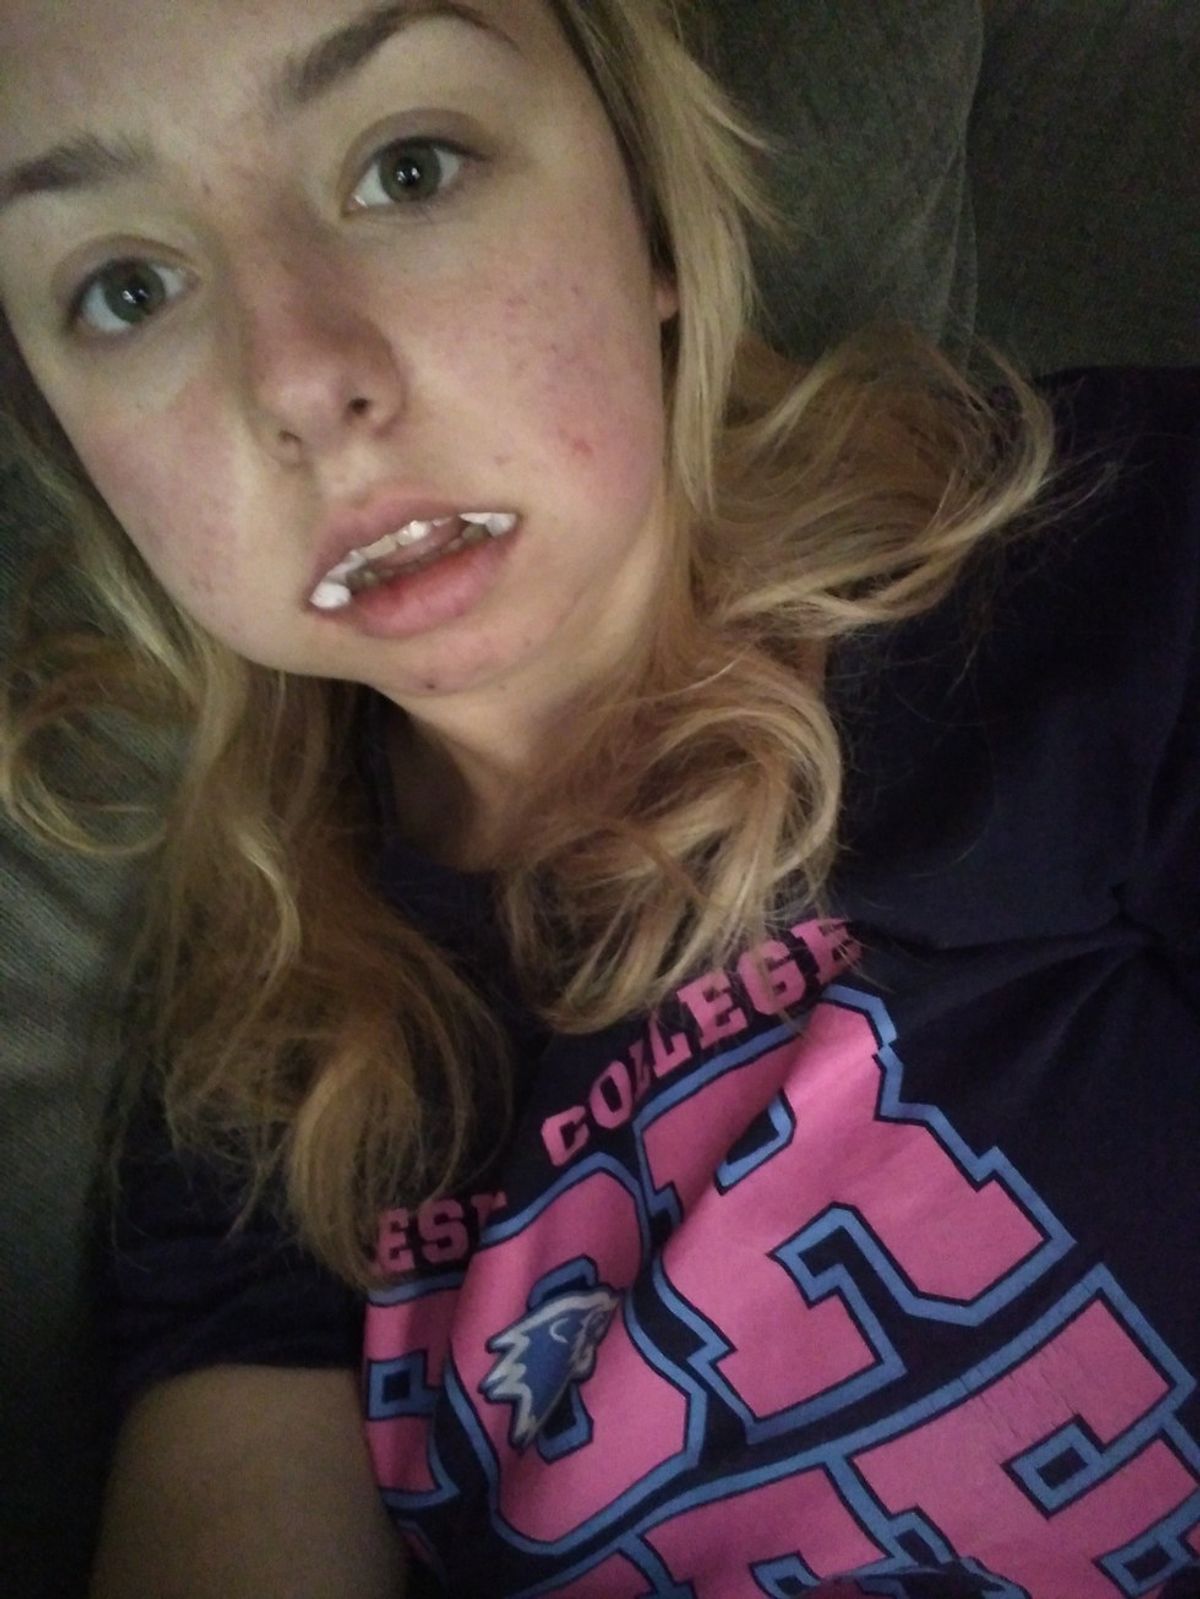 20 Stages of Getting Your Wisdom Teeth Taken Out